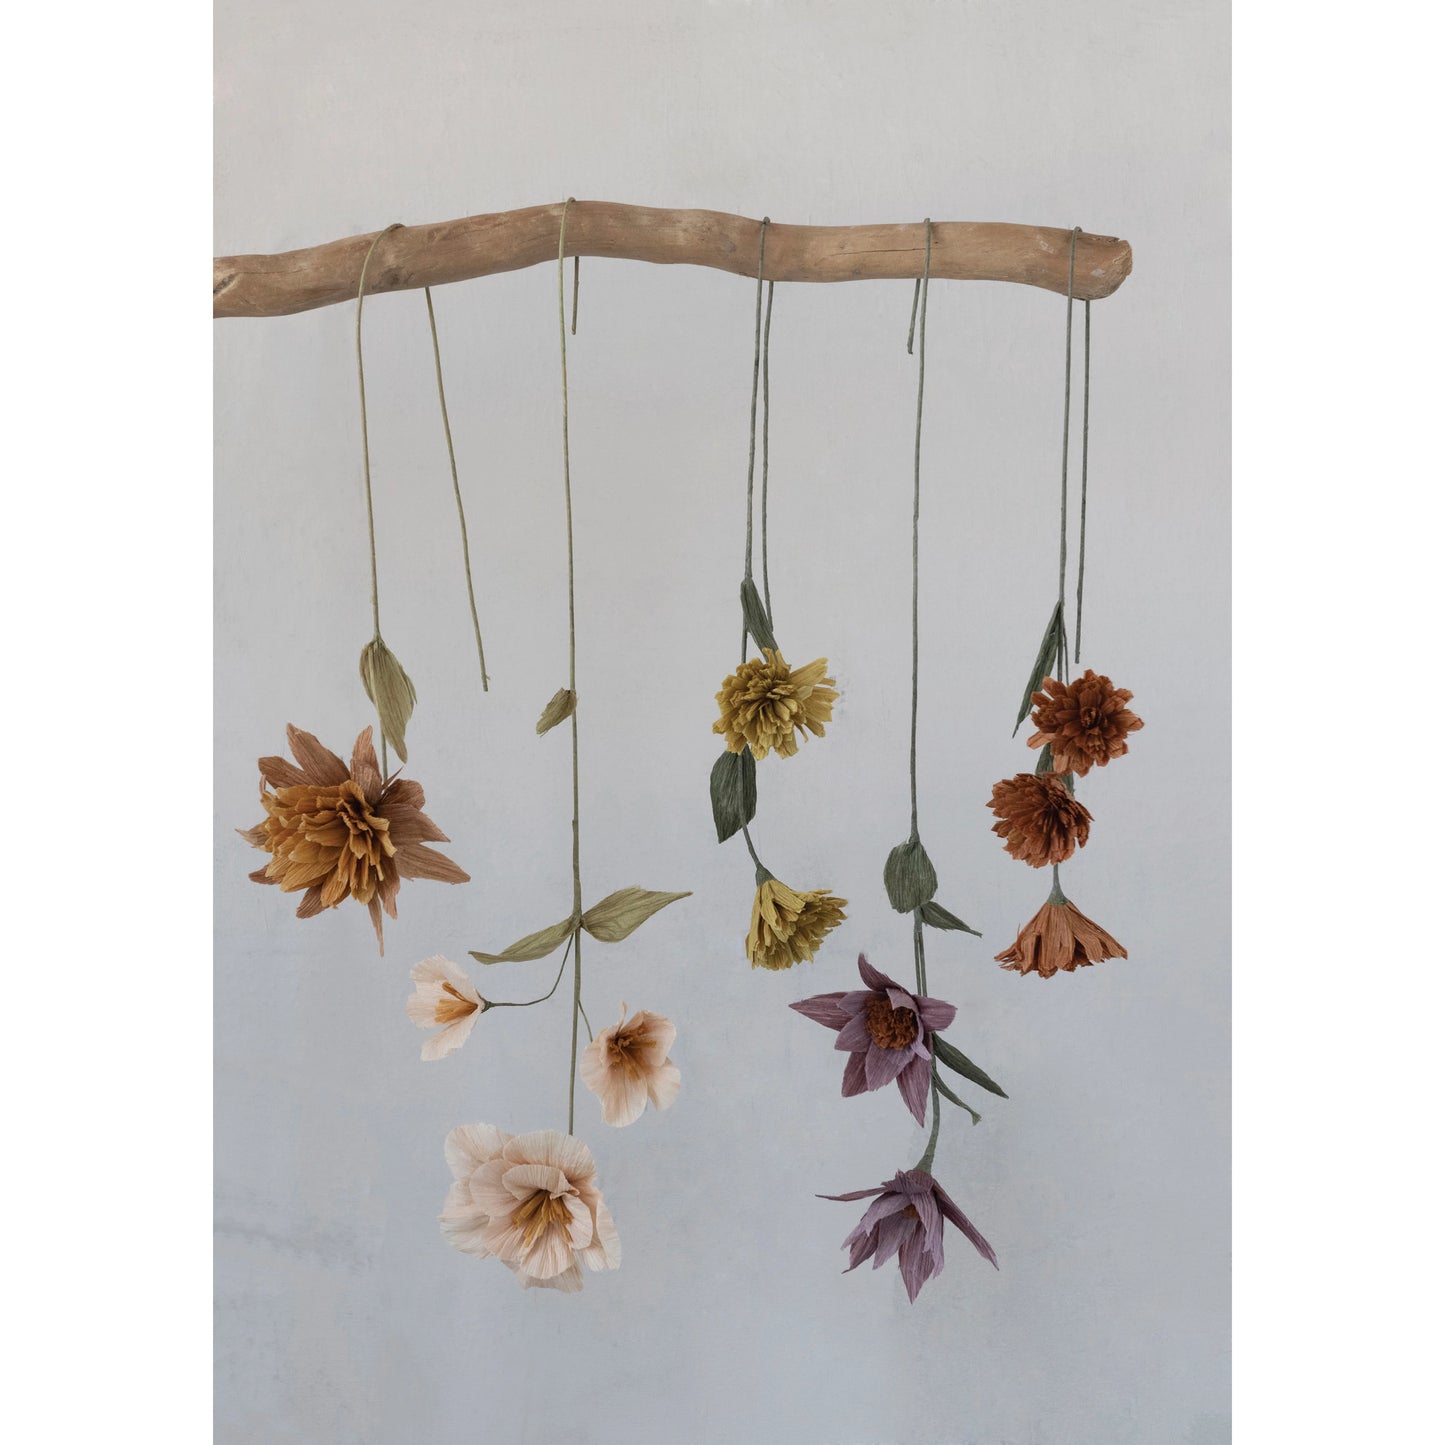 assorted paper flowers hanging upside down from a branch.